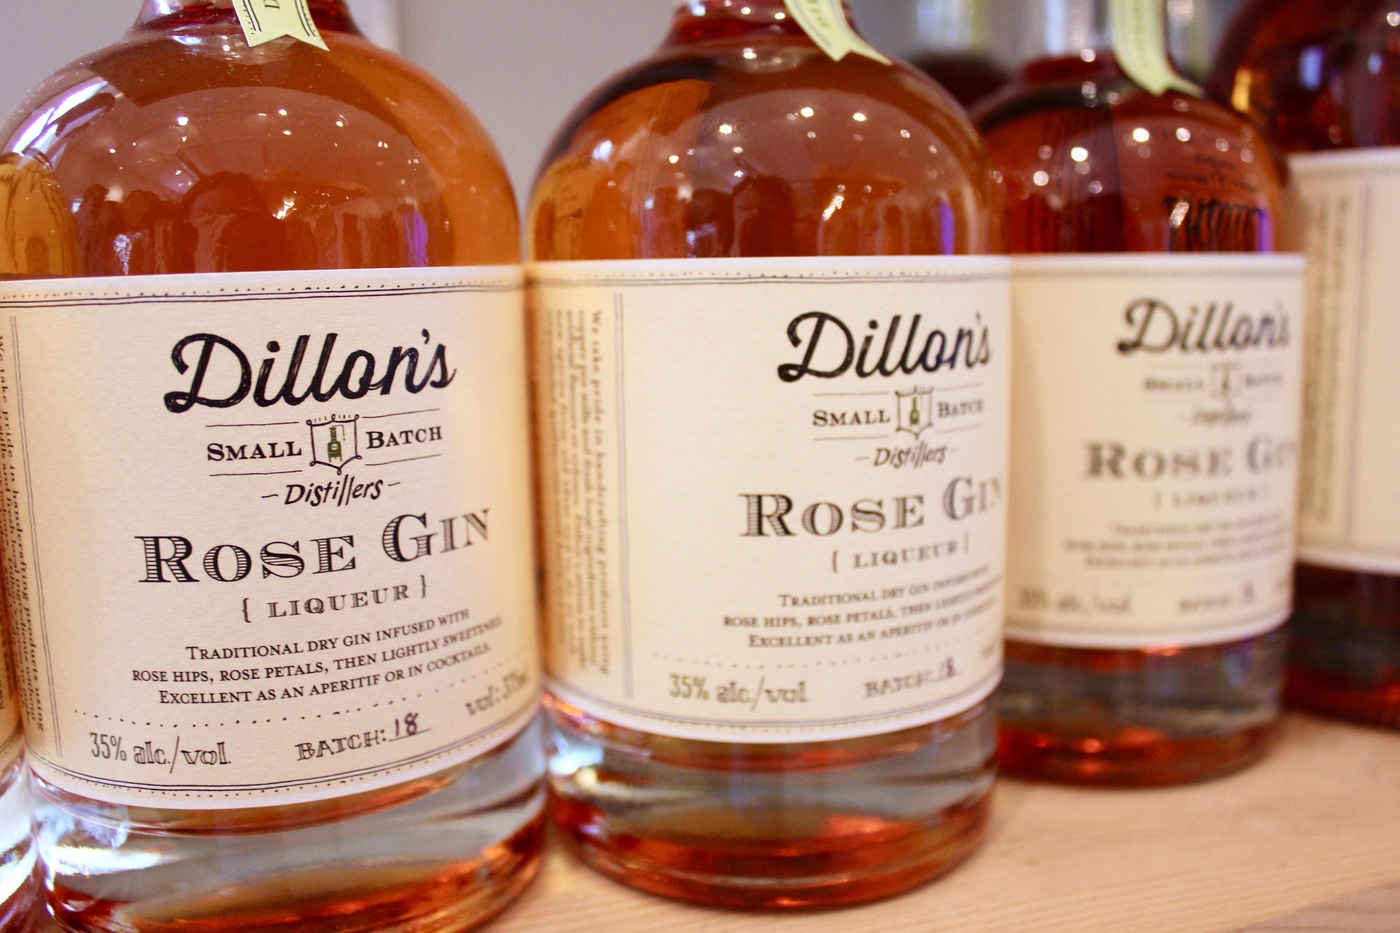 Bottles of Dillon's delicious rose gin